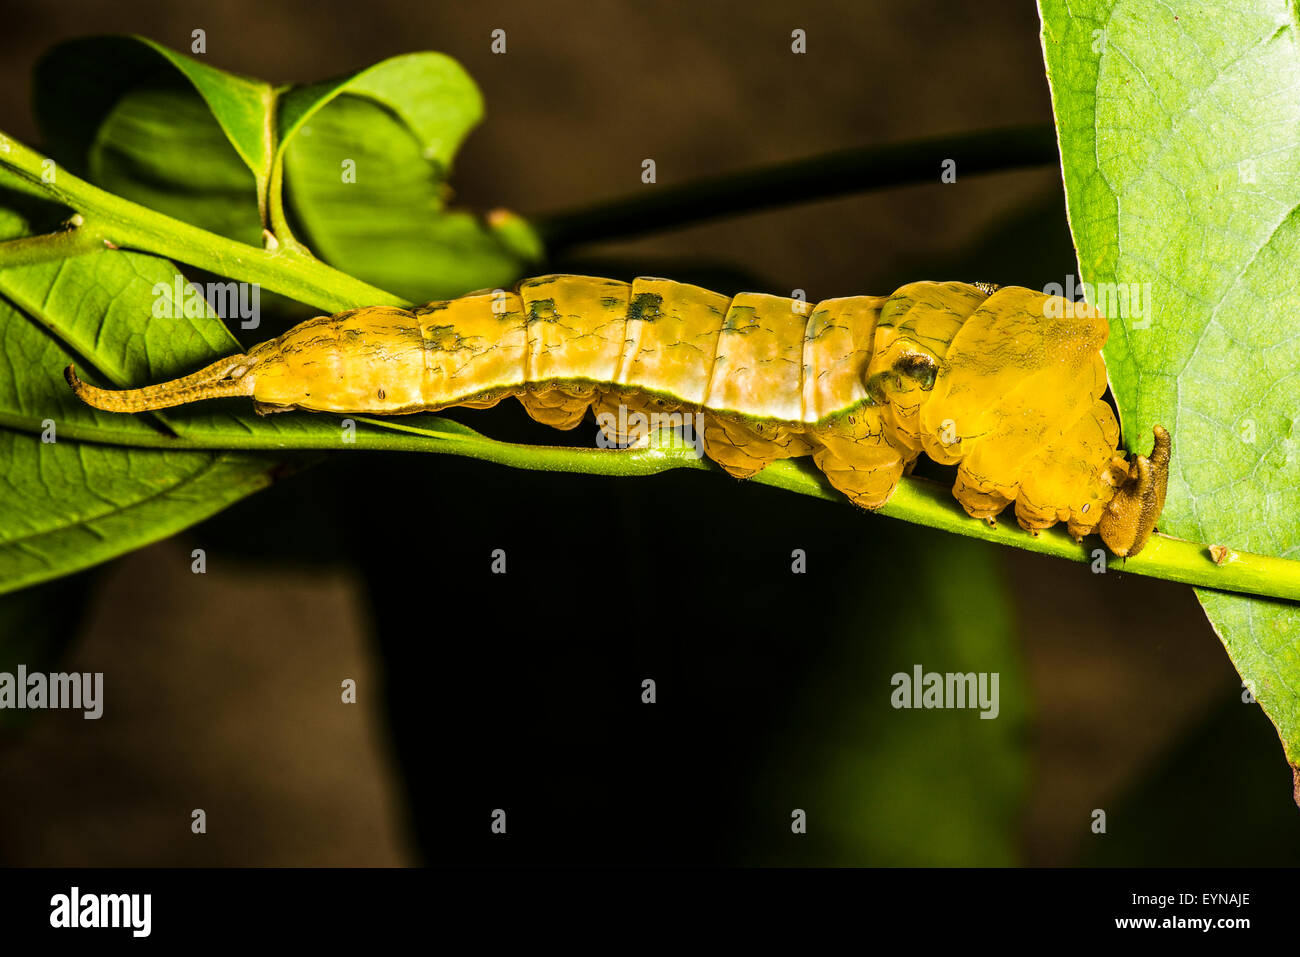 A caterpillar of the Banded King Shoemaker butterfly Stock Photo